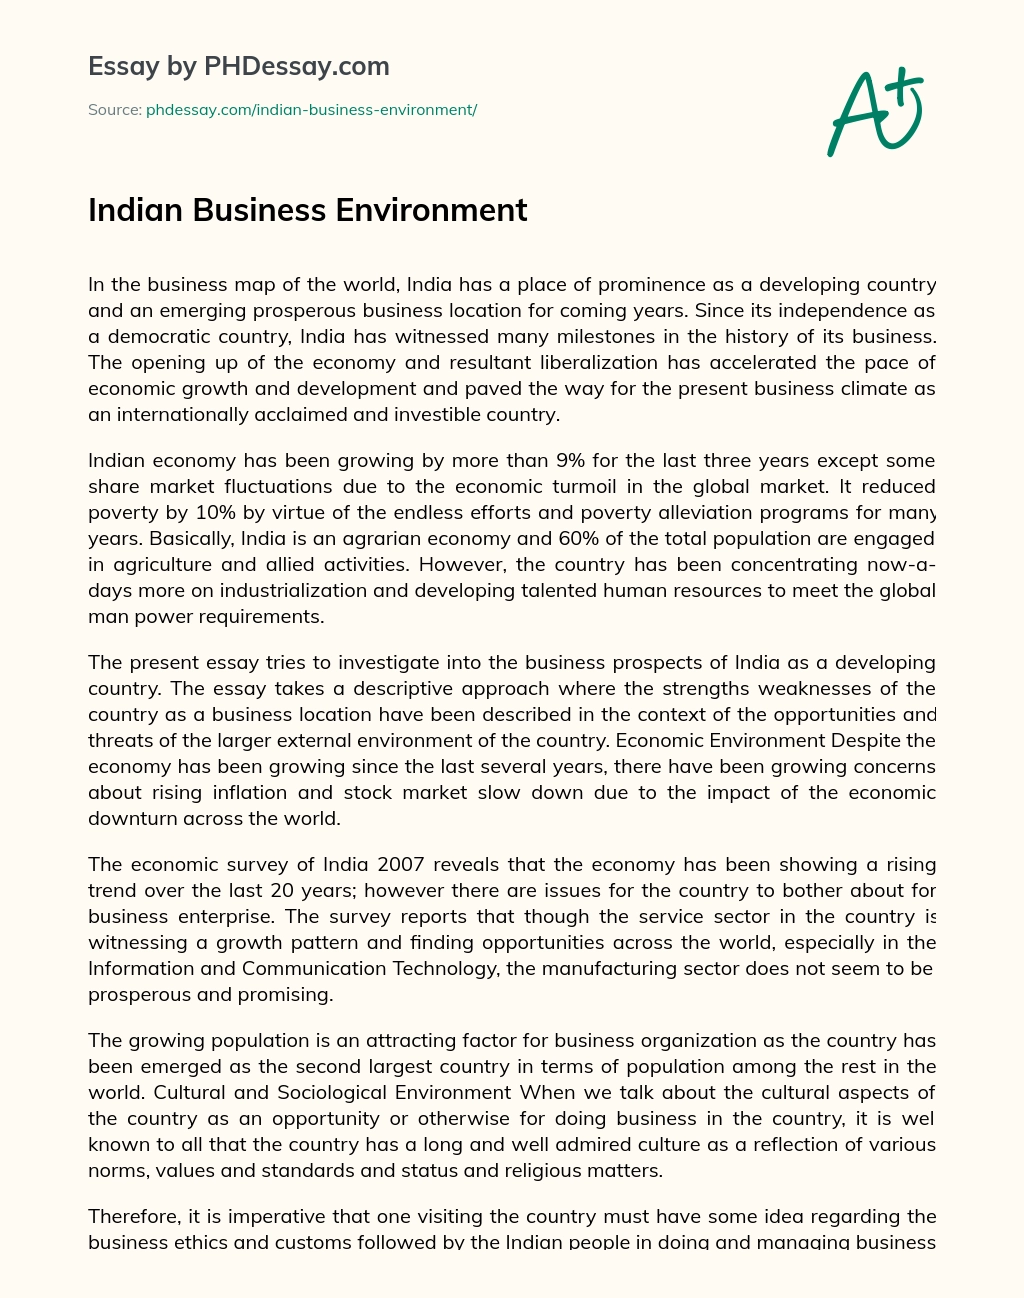 Indian Business Environment essay